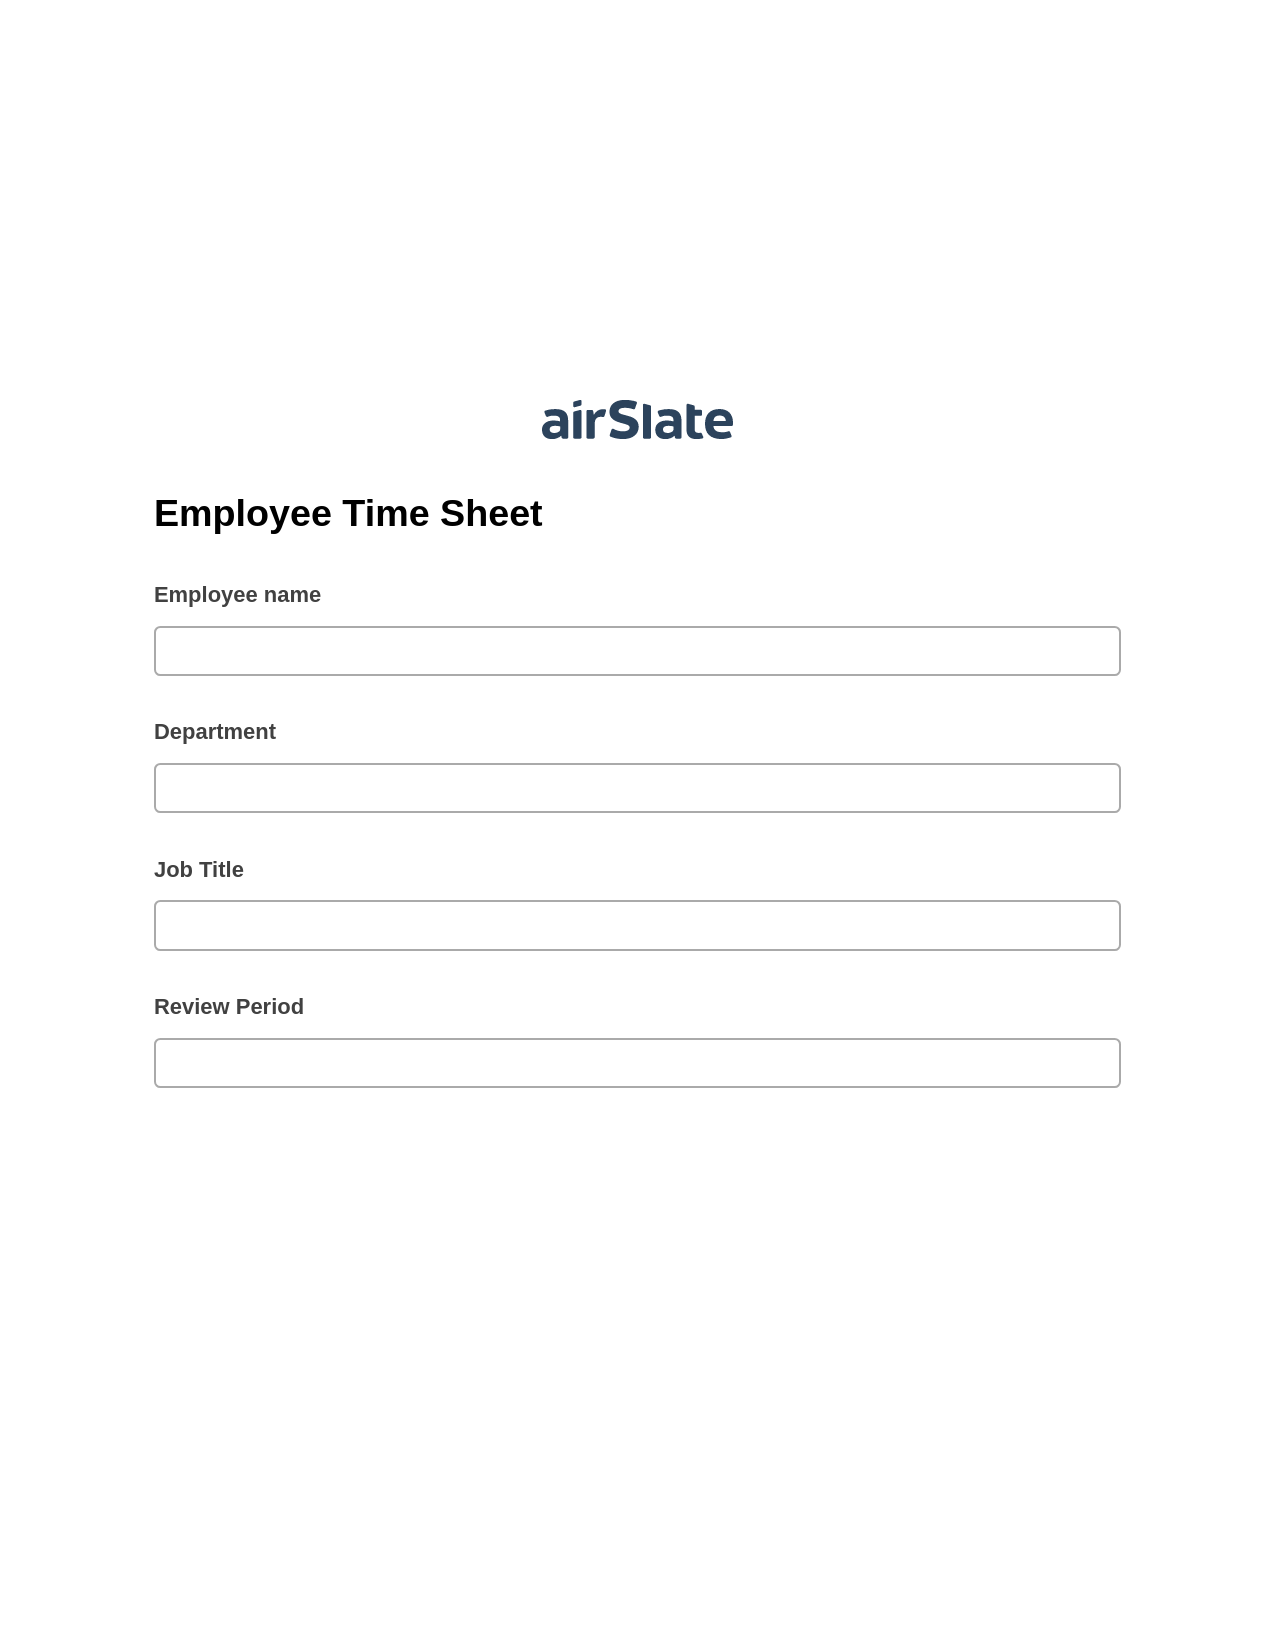 Employee Time Sheet Pre-fill from Google Sheets Bot, Slack Notification Bot, Archive to OneDrive Bot